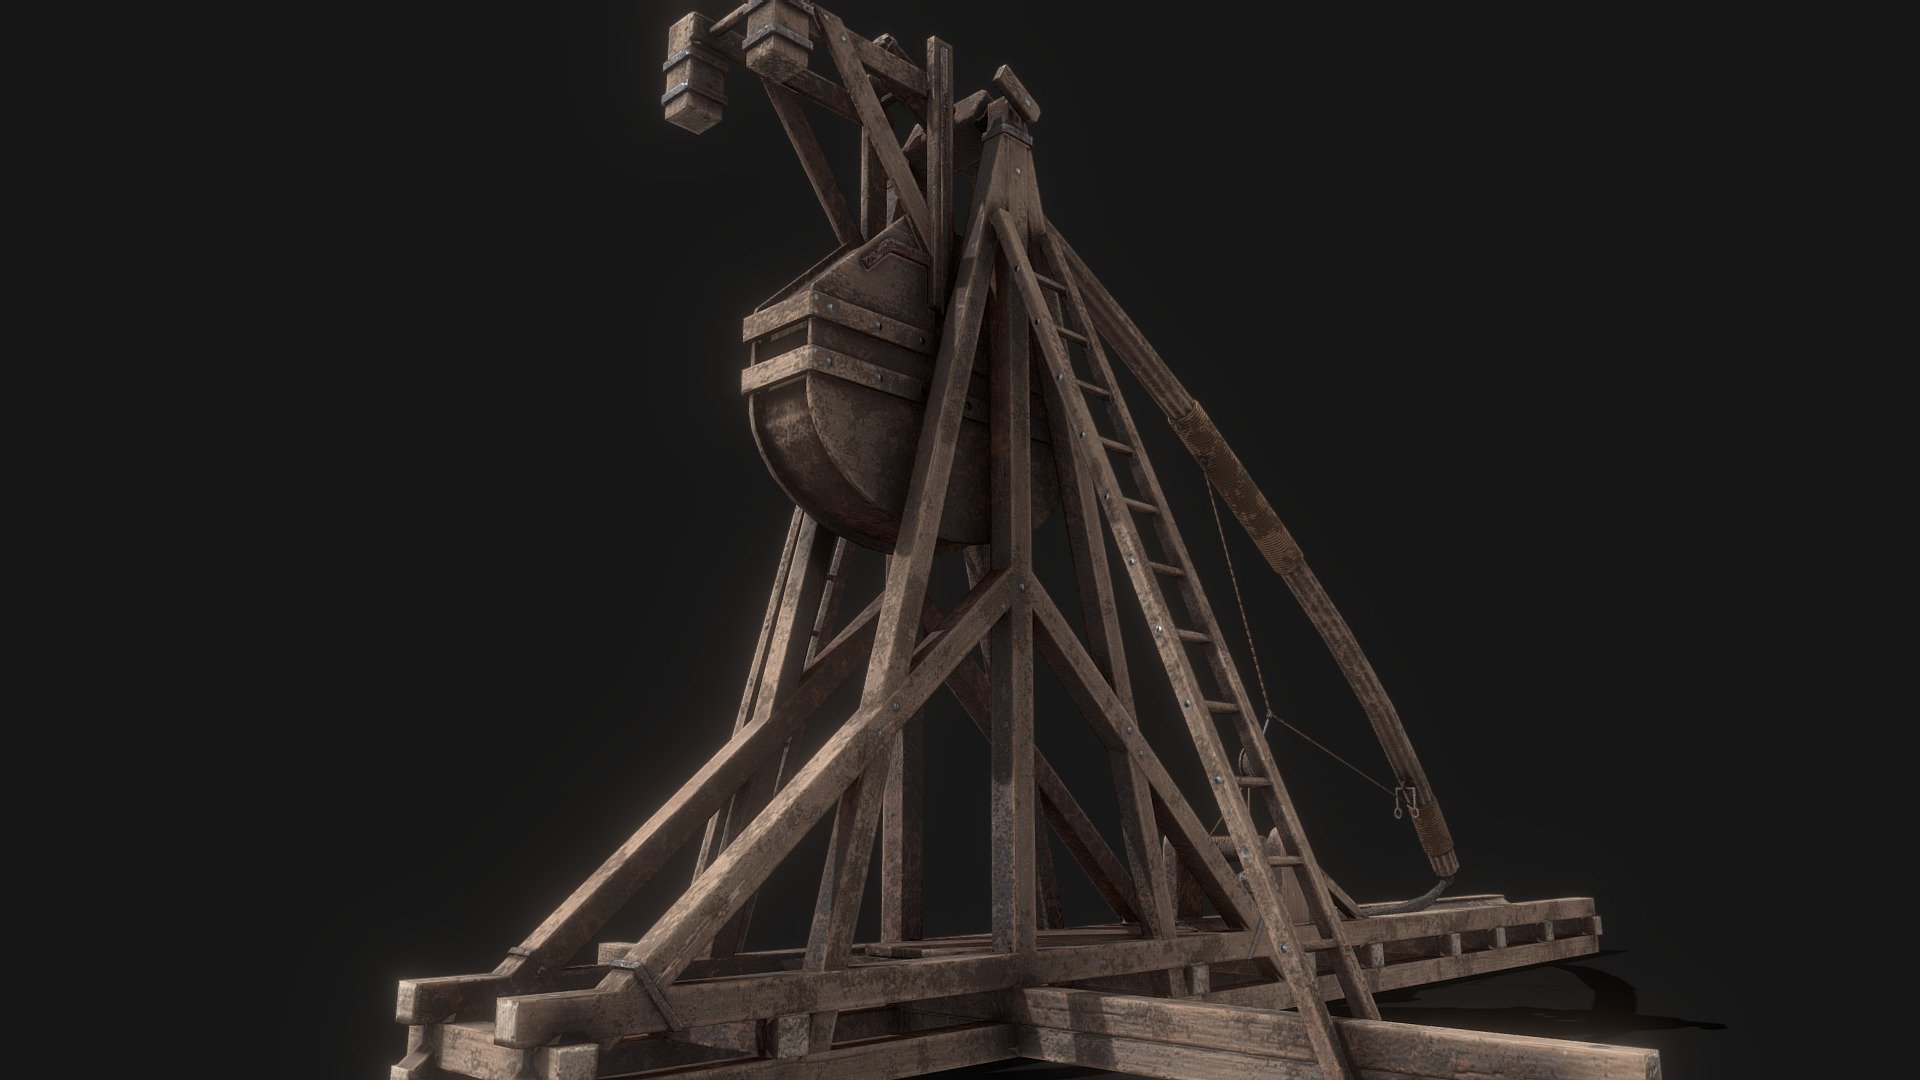 An animated medieval Trebuchet!

Includes ‘Launch’ and ‘Reload’ animations.

Designed for games in Low-poly PBR including Albedo, Normal, Metallic, AO, and Roughness 4K textures.

This model from Ferocious Industries can be found in 3 different material skins, and this one uses the ‘Used’ texture set.

5542 Triangles 3d model